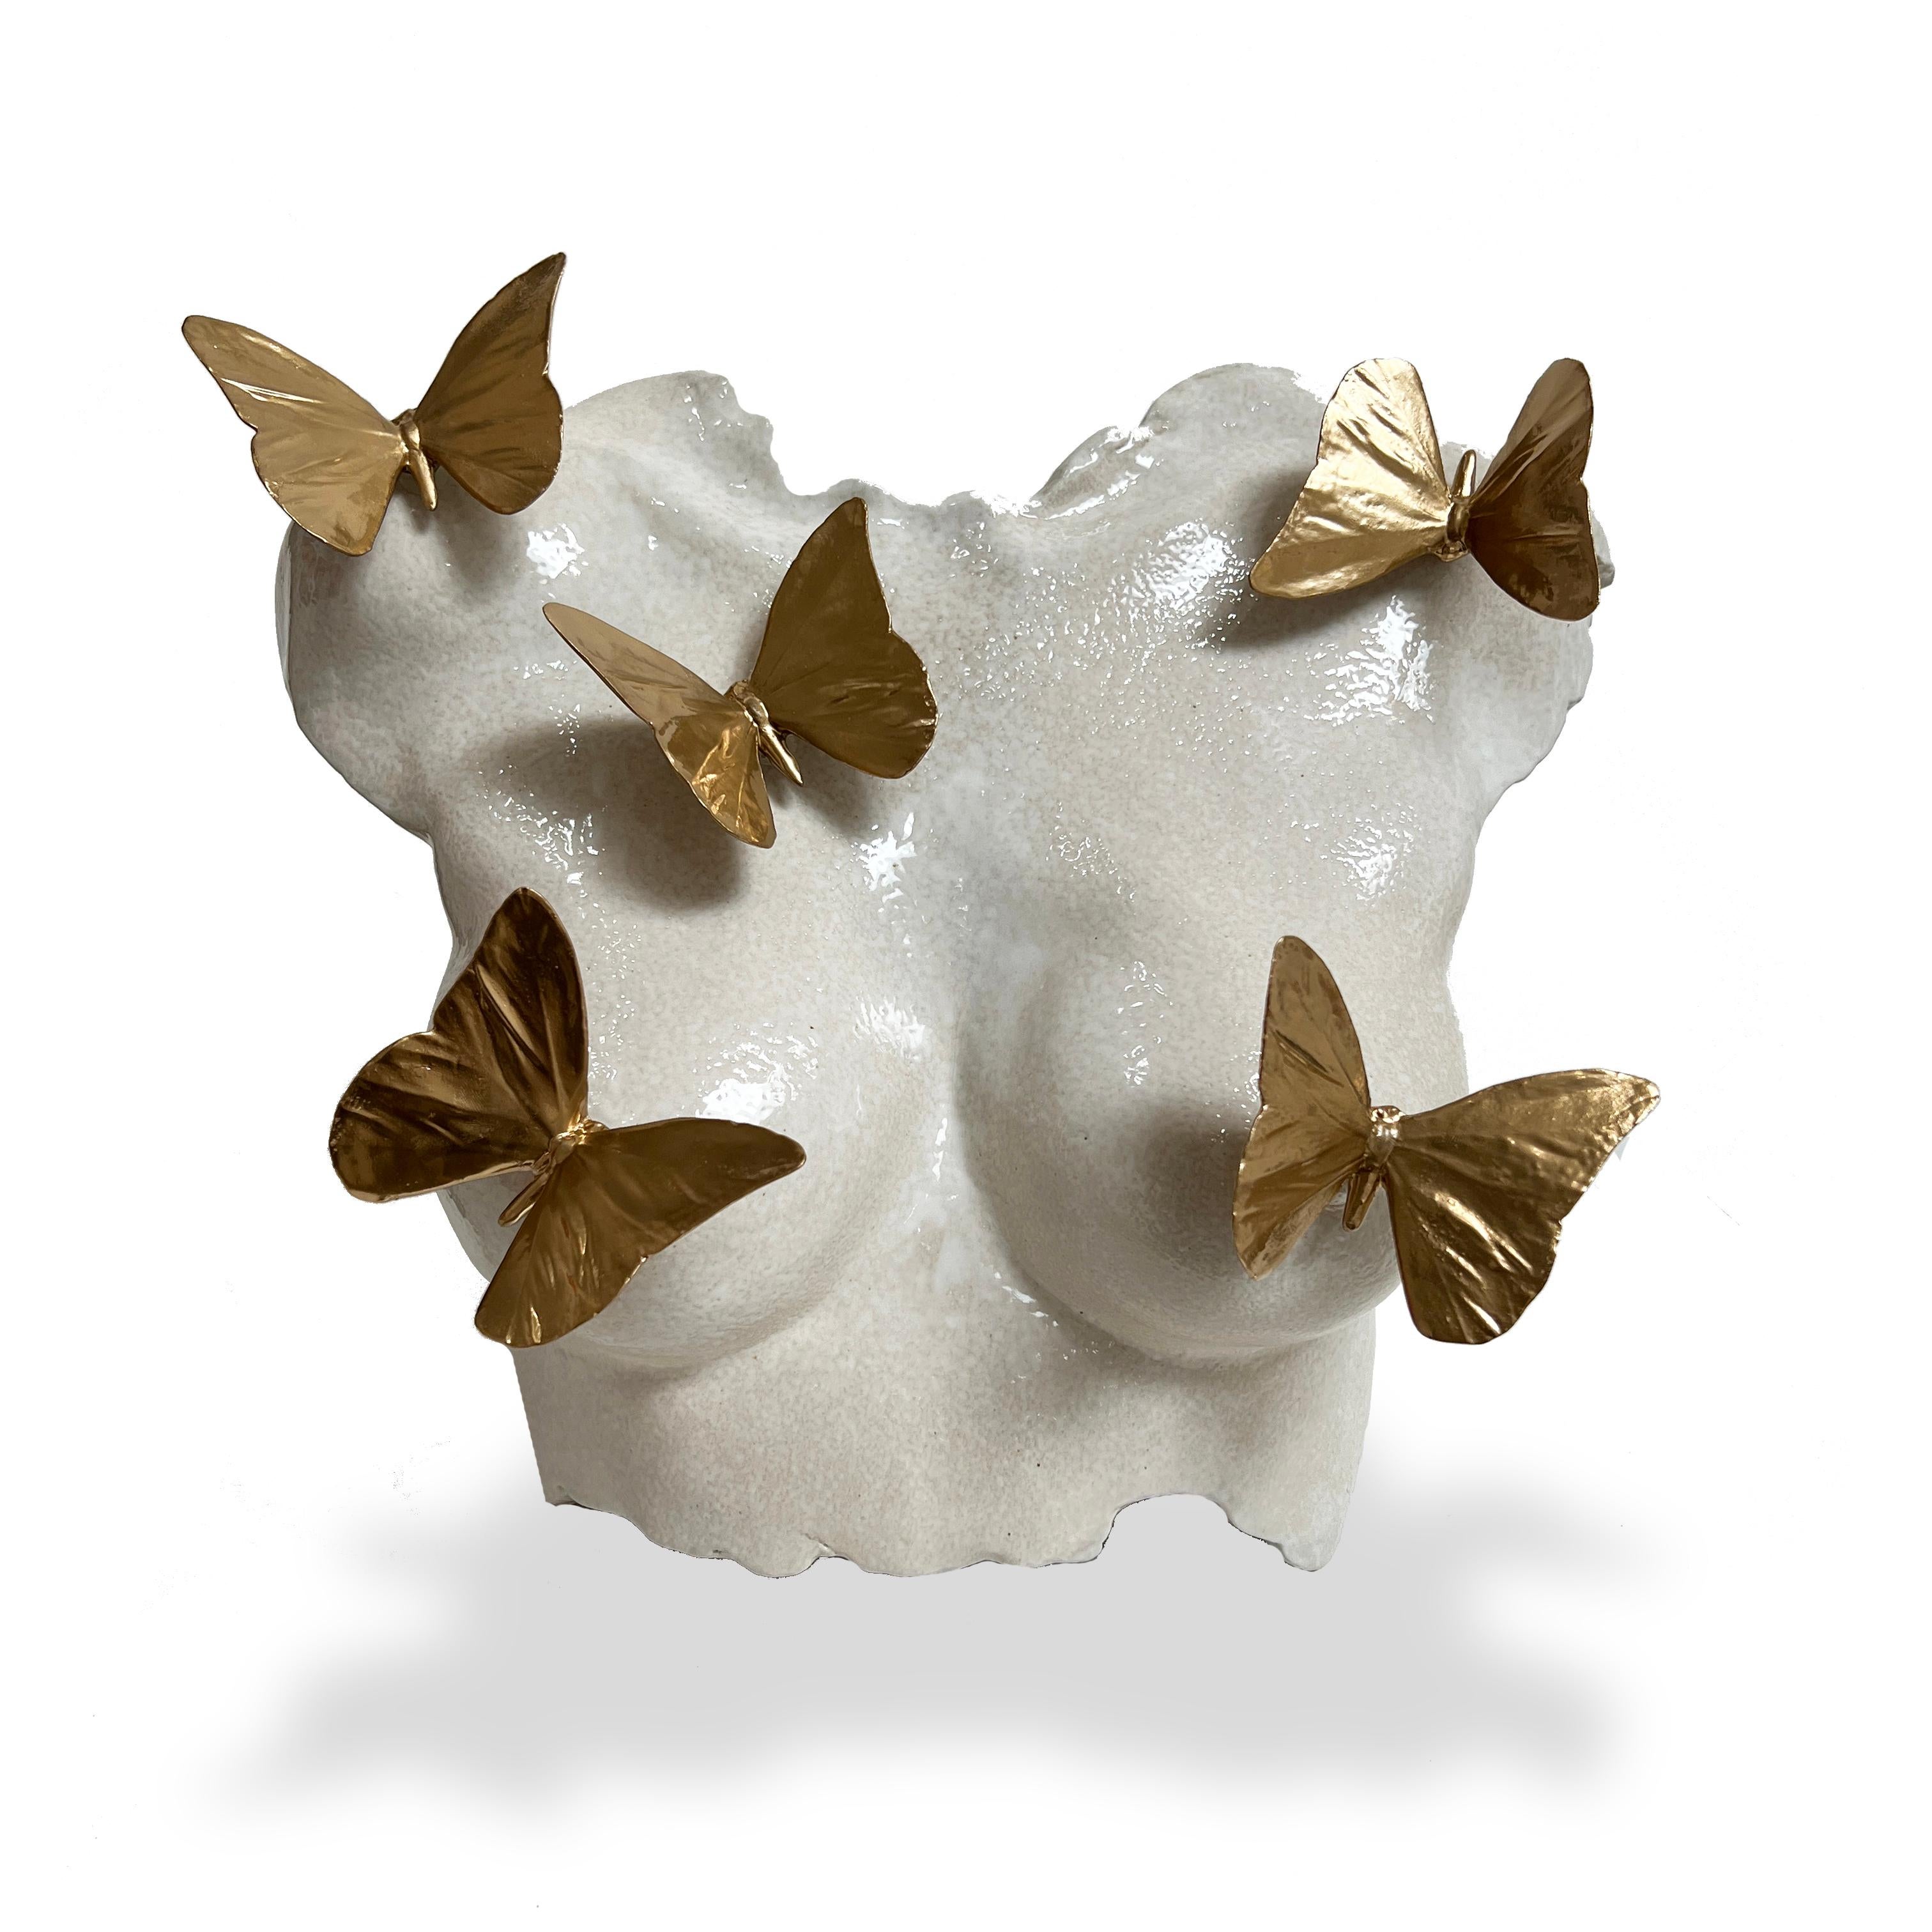 This exquisite freestanding sculpture, measuring 13 inches high and 16 inches wide, and 7 inches deep, is a true work of art. The piece is created with a shiny off white glaze that imbues it with a soft and ethereal quality, elevating the overall